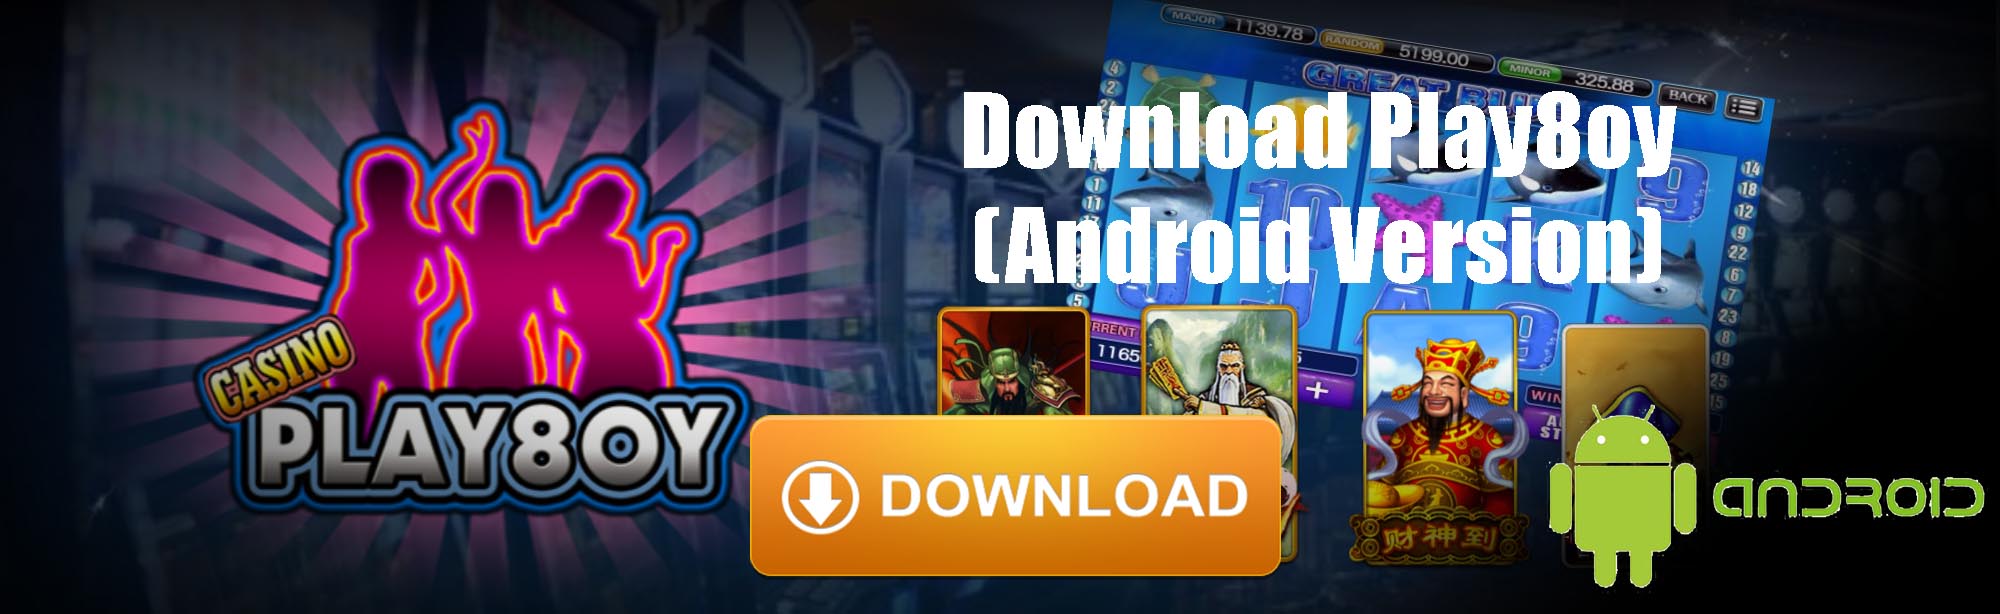 Download Play8oy